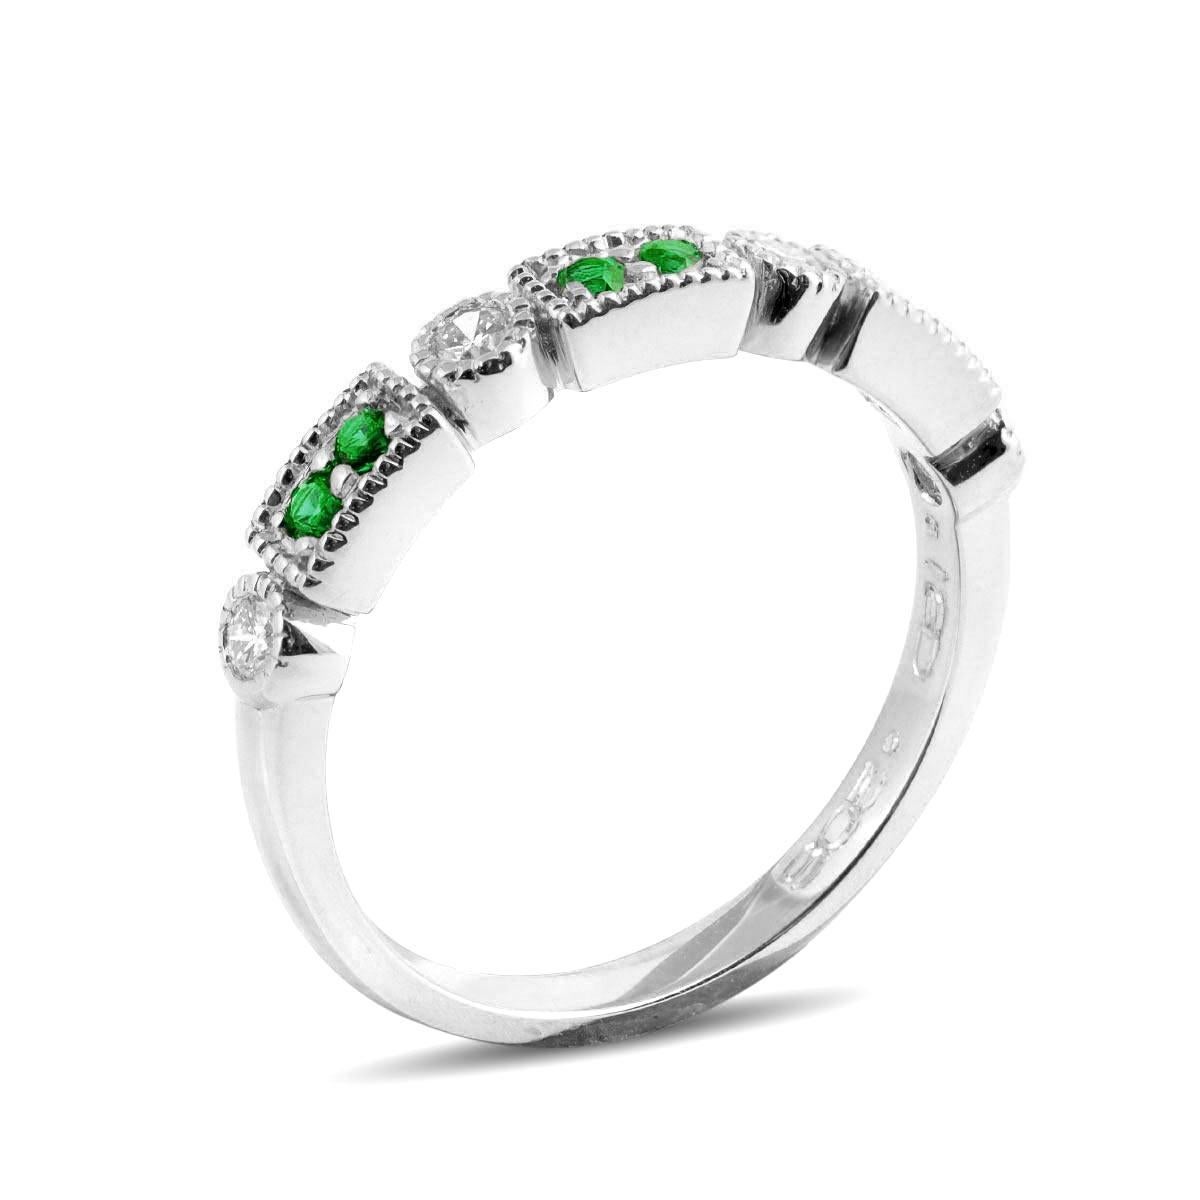 A beautiful stackable ring set with vibrant Tsavorites has got us all green with envy. The rich color of the gemstone paired with the sparkle of the diamonds is exactly what gives this ring its charm. An easy choice to pair with other piece of